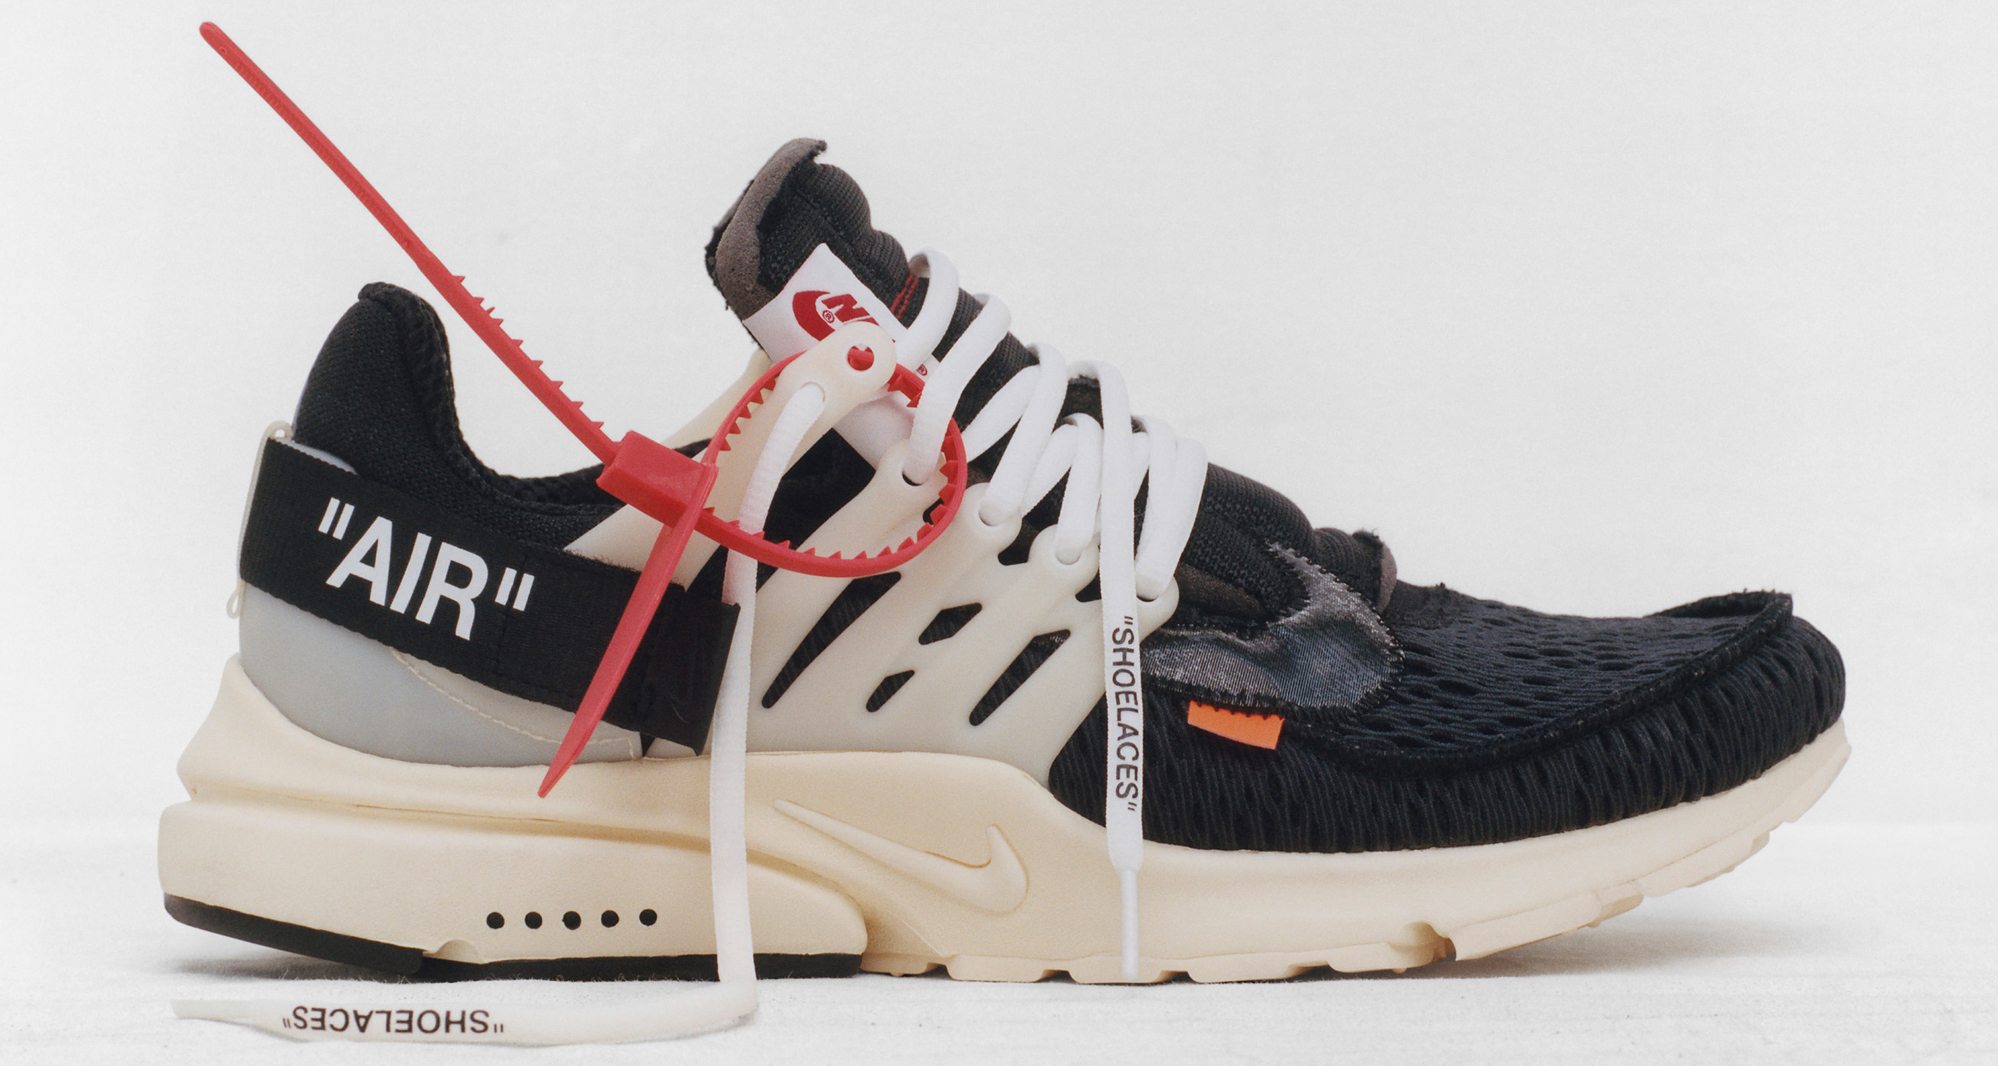 Off-White x Nike: The History Behind Virgil Abloh's Sneaker